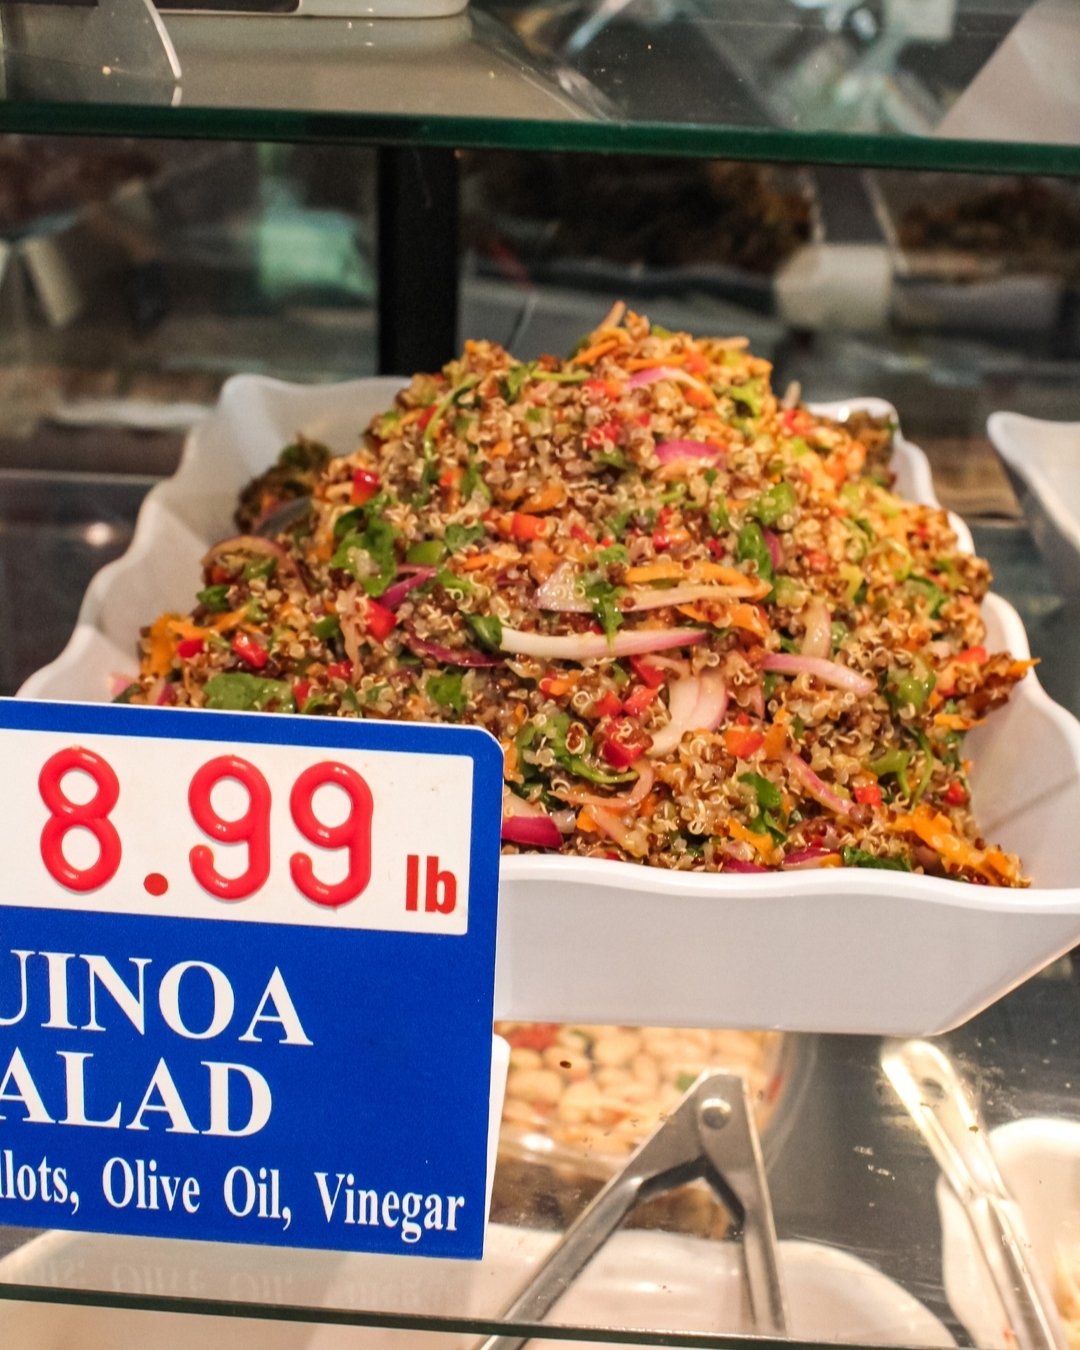 Need a side salad for your BBQs this weekend? Try our house made quinoa salad - made fresh every day. 

#bethesdamd #shoplocal